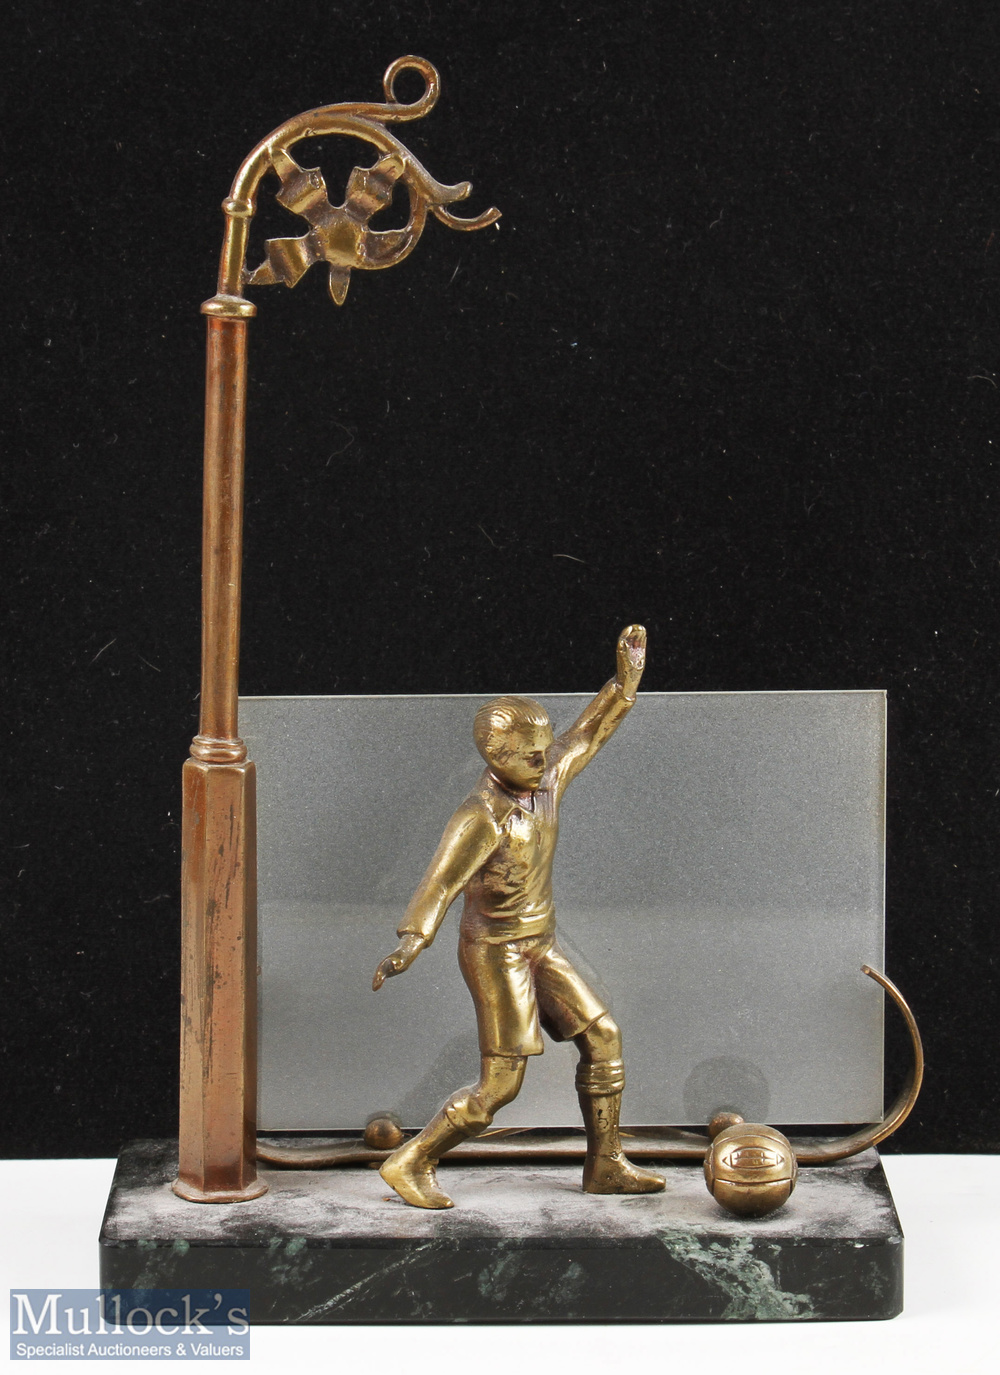 1930s Spelter and Marble Child Playing Football Lamp brass finished spelter lamp, with glass panel